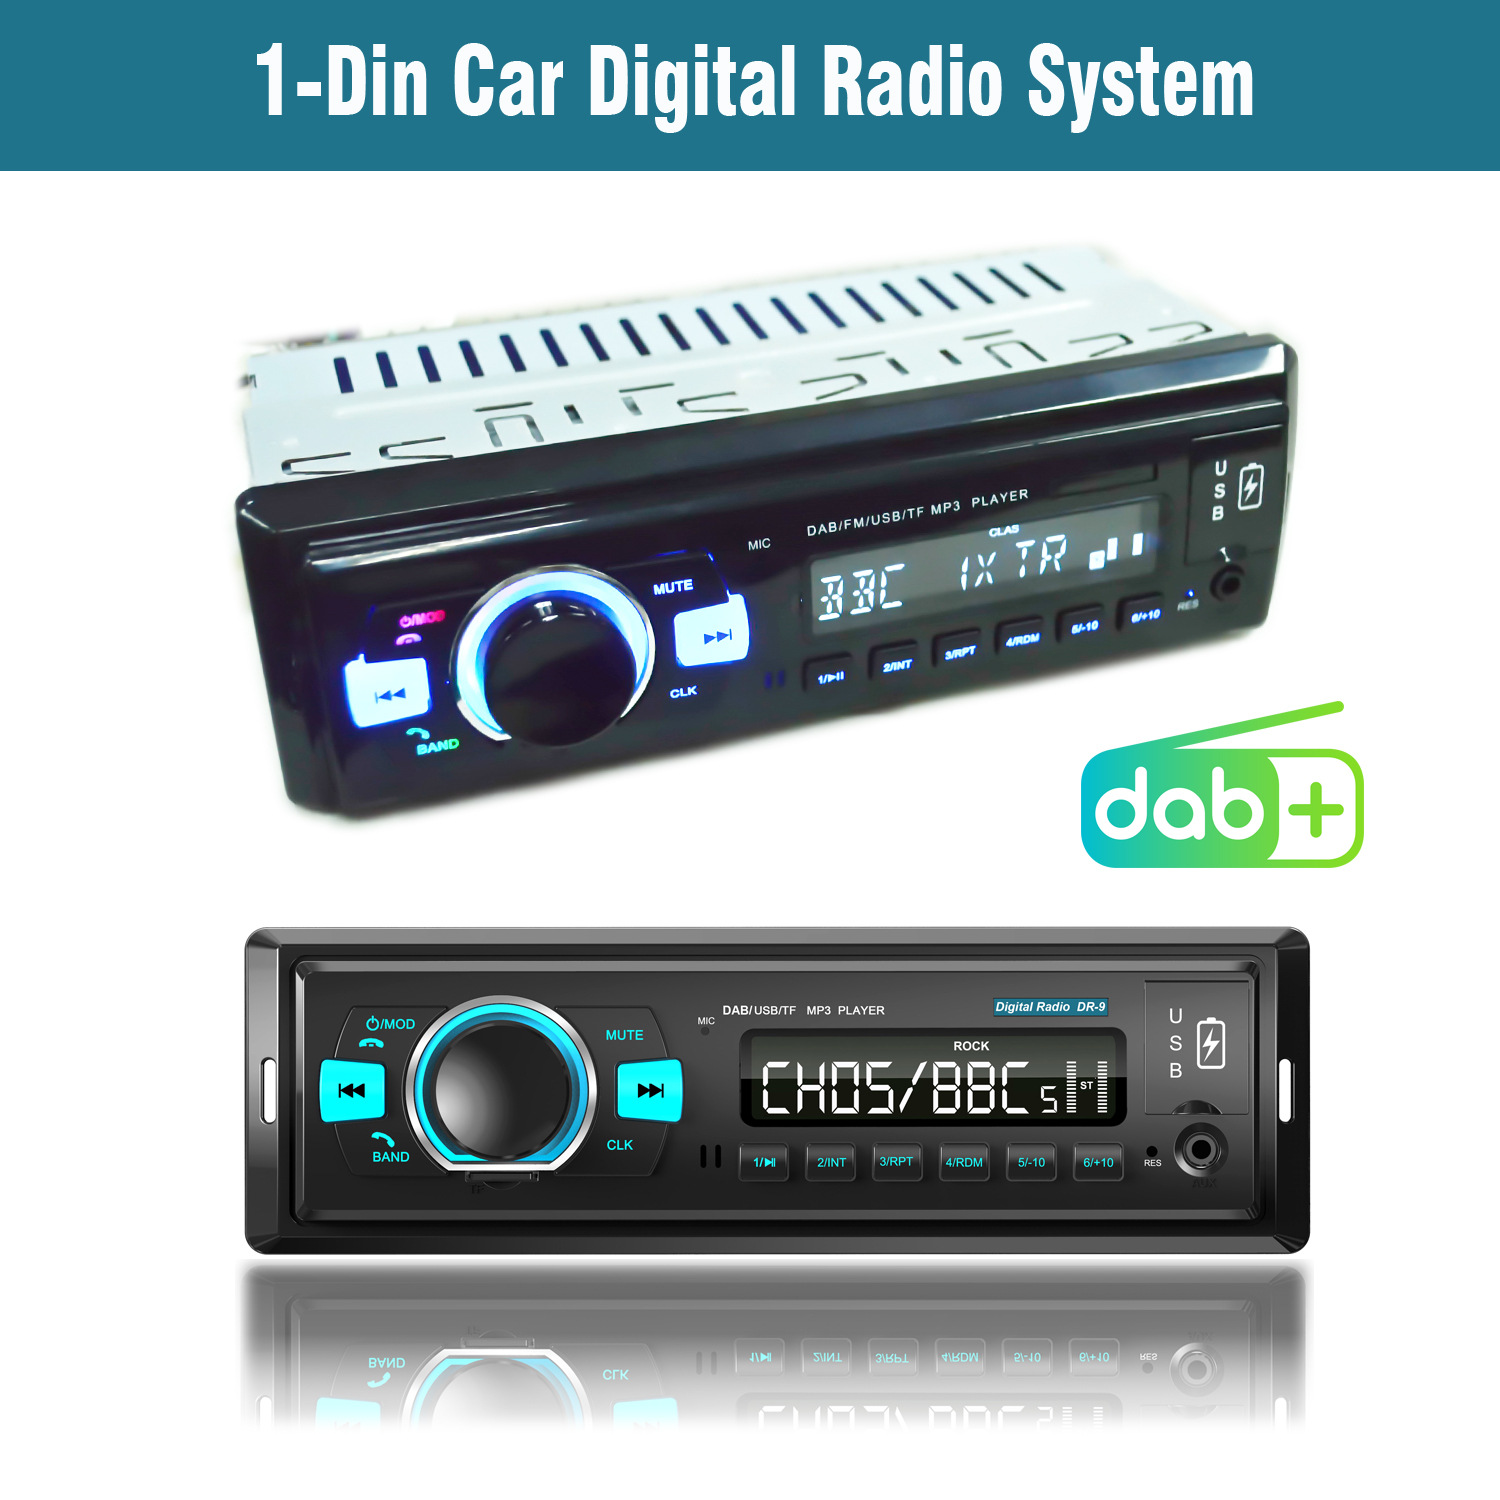 European Market FM| DAB Radio || Support TF Card MP3 Playback|Built-in Rechargeable Battery For Long Battery Life